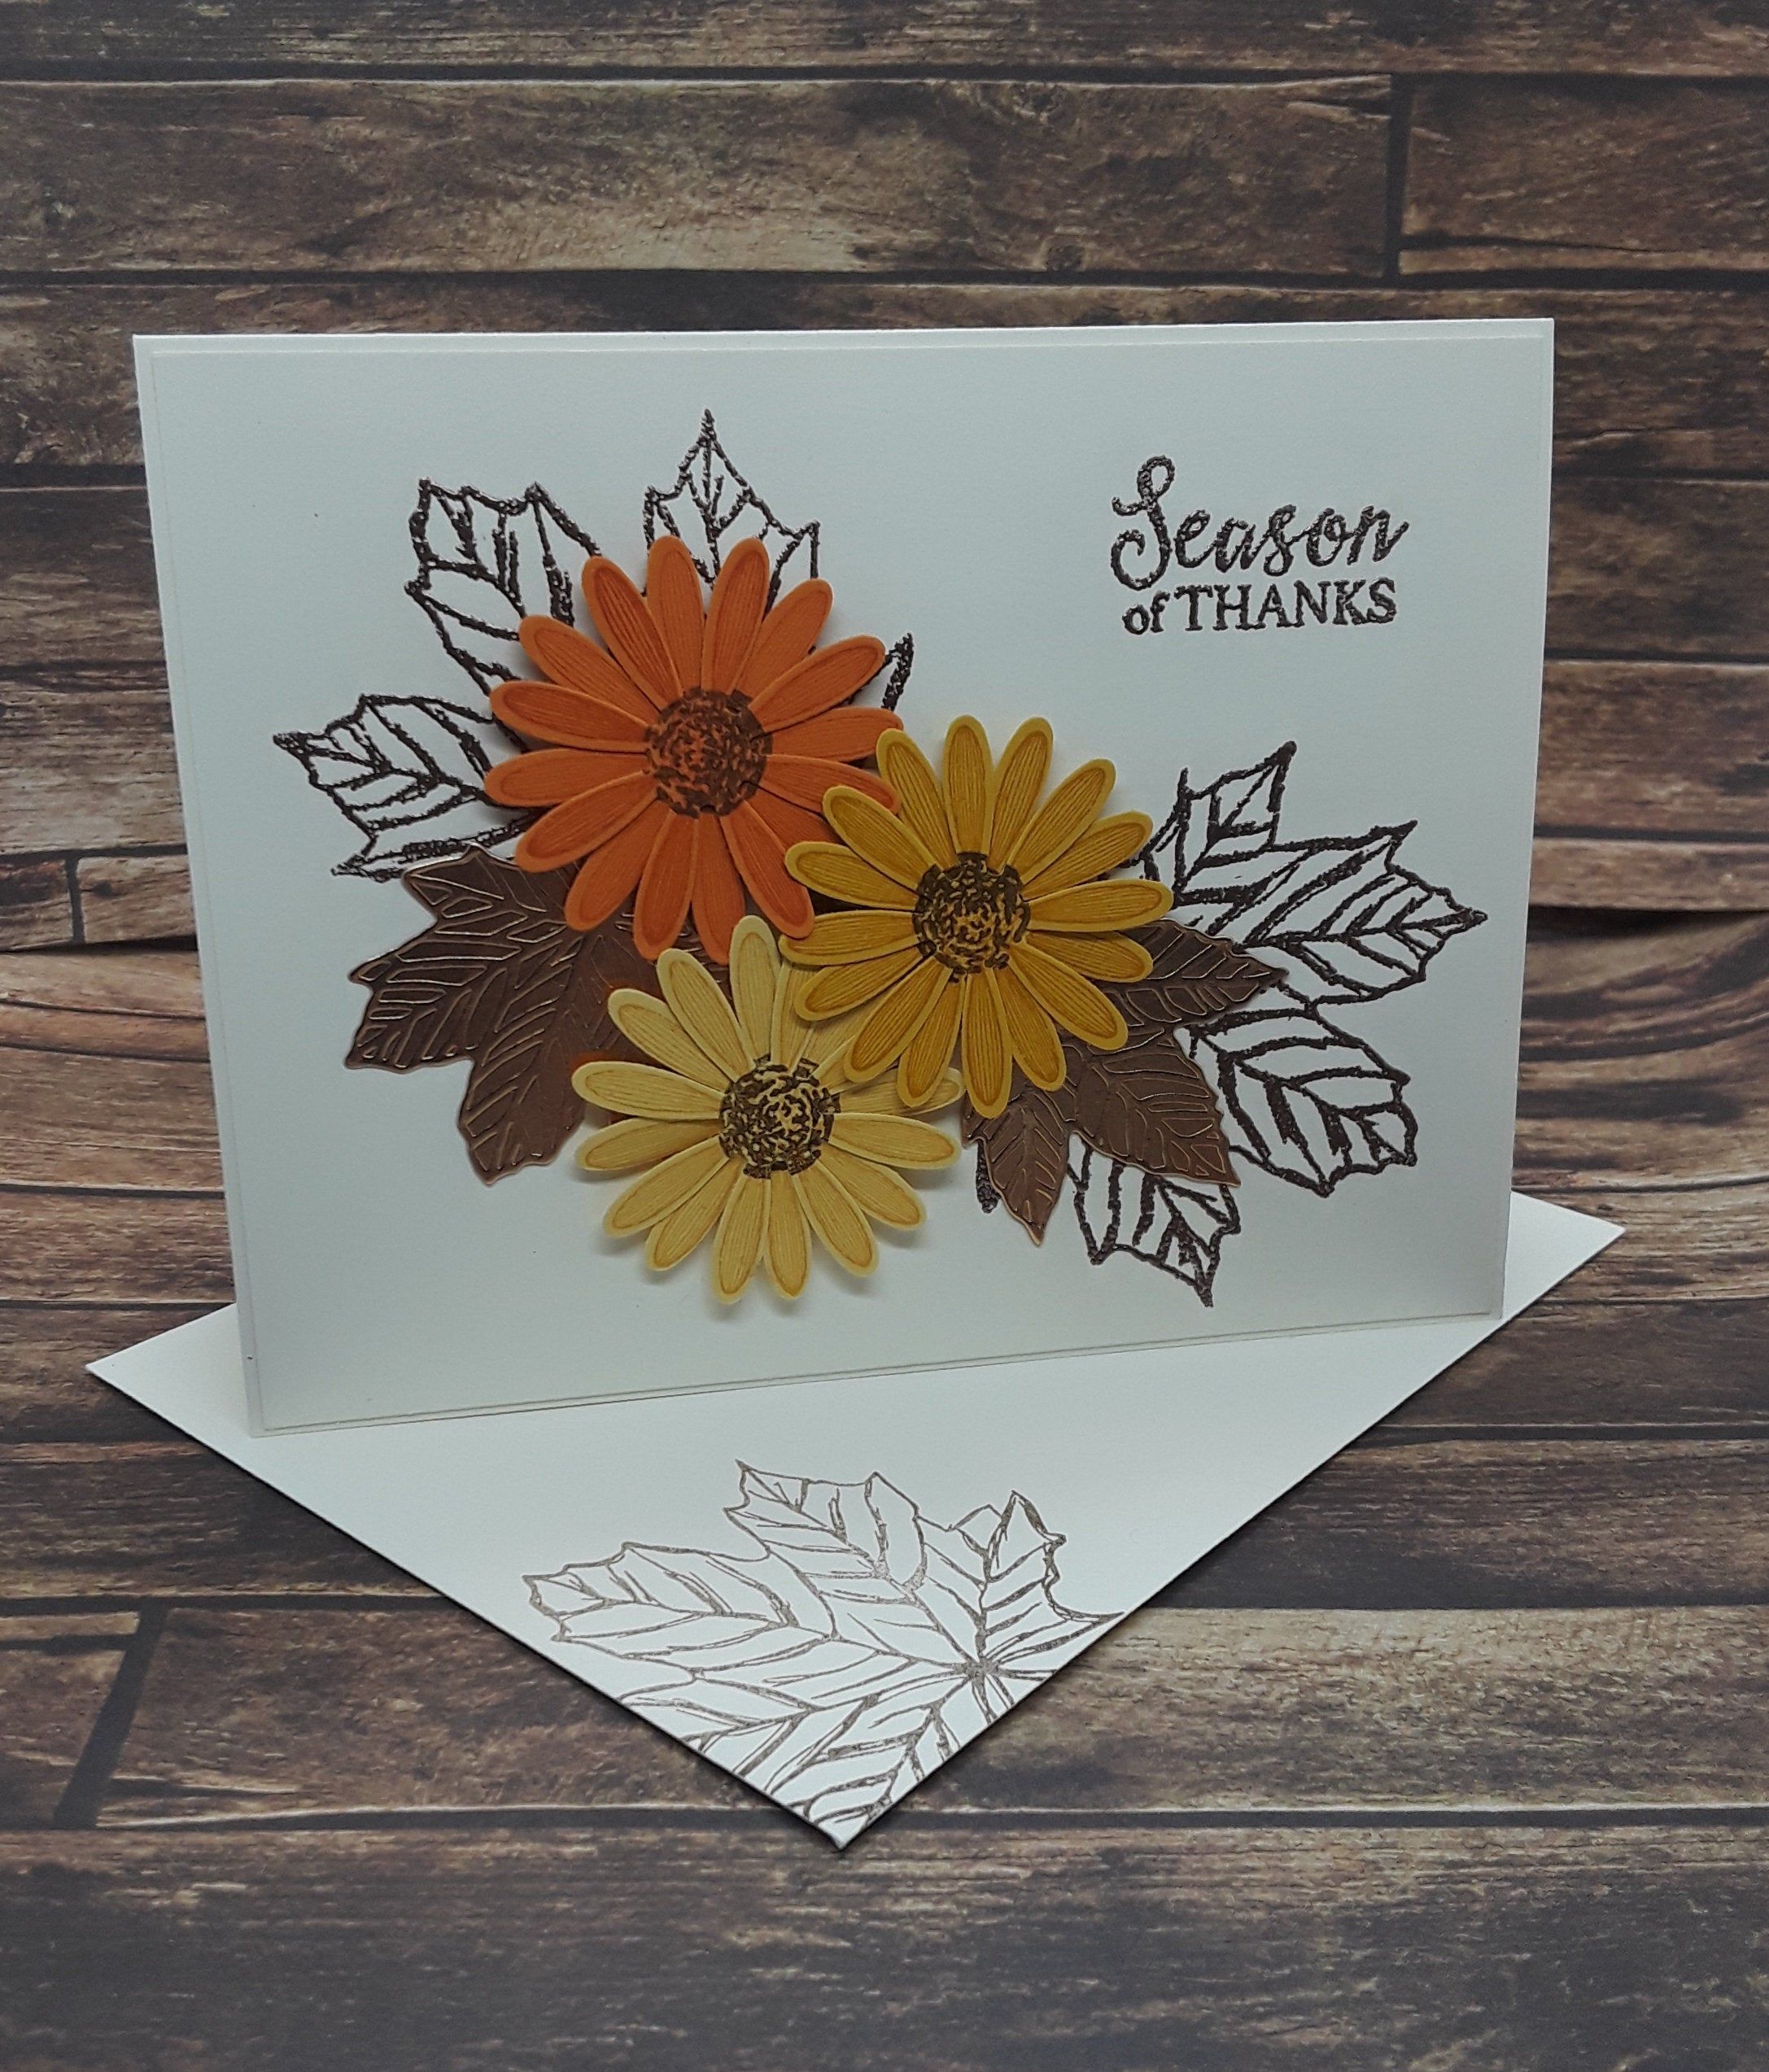 Season of Thanks Stampin' Up! Fall Thanksgiving Day Holiday Greeting Card Handmade Handstamped - Season of Thanks Stampin' Up! Fall Thanksgiving Day Holiday Greeting Card Handmade Handstamped -